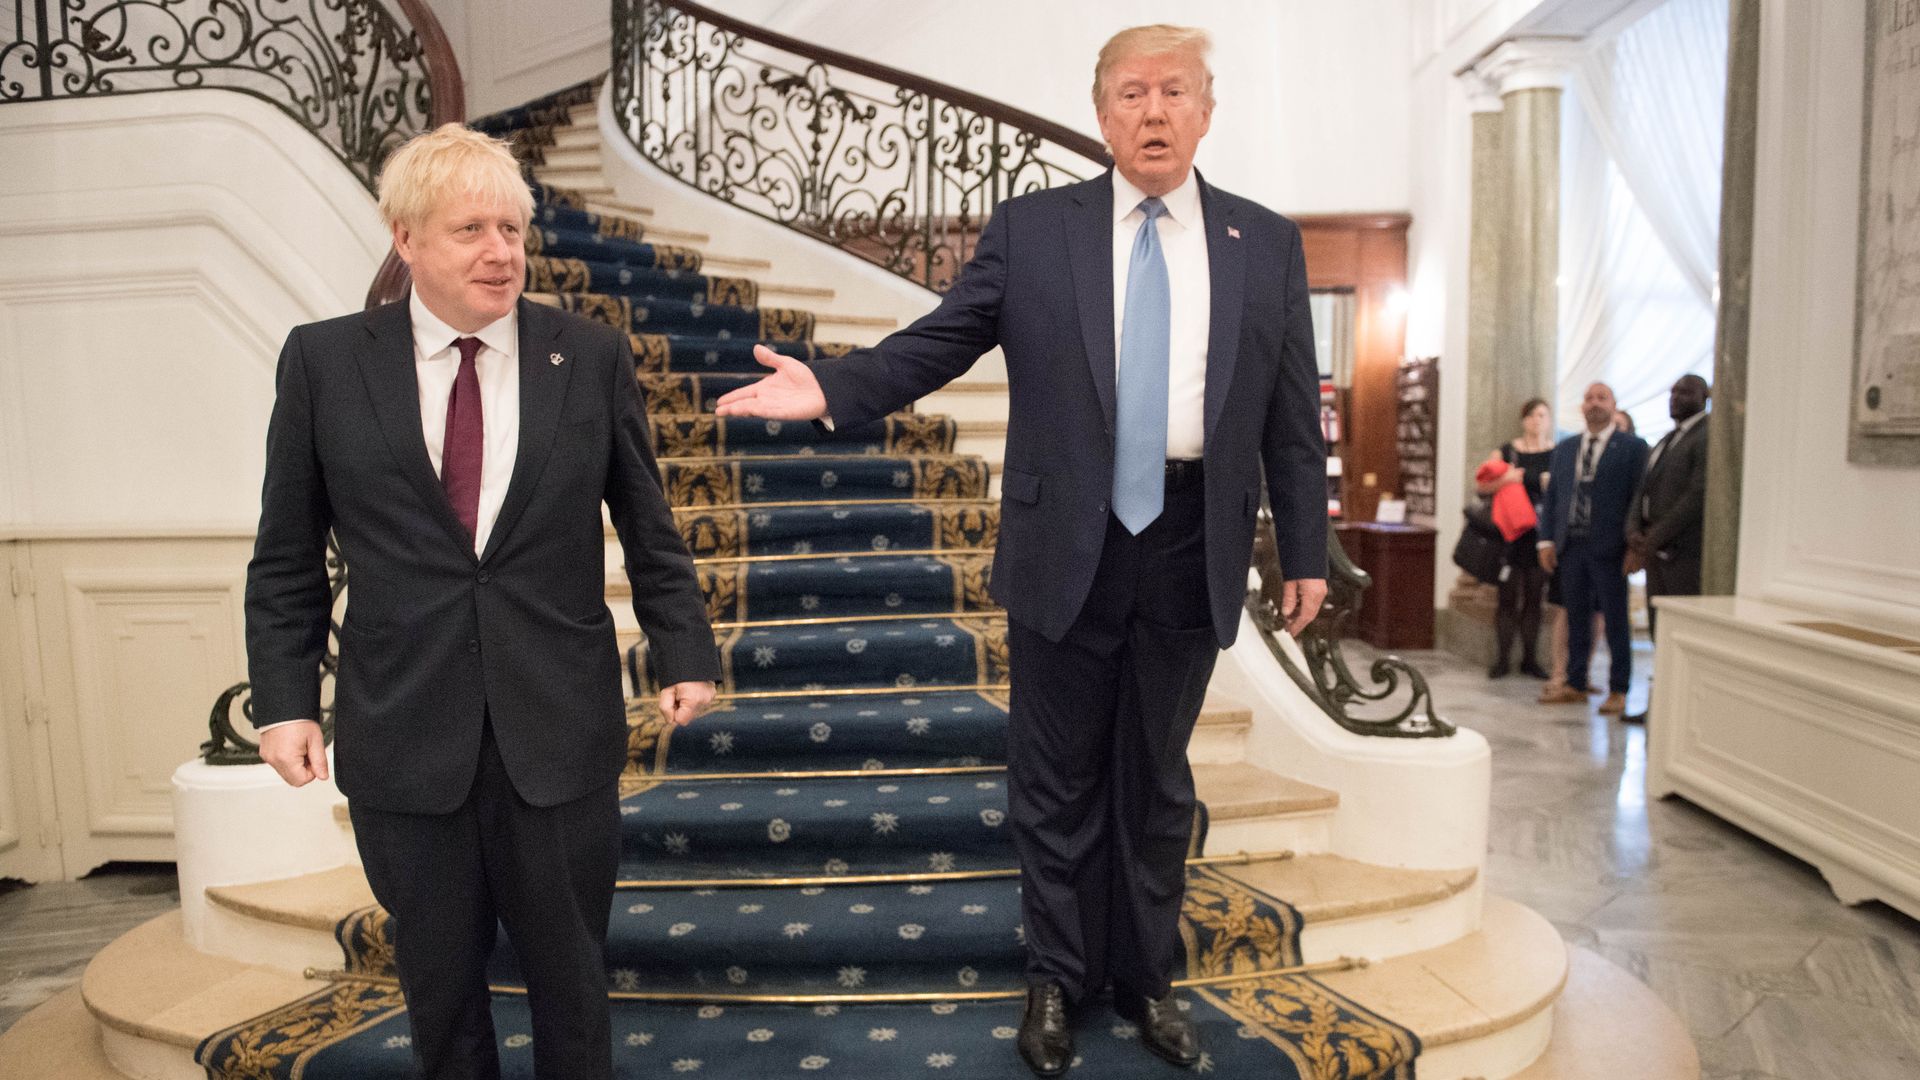 President Donald Trump and Britain's Prime Minister Boris Johnson arrive for a bilateral meeting during the G7 summit on August 25, 2019 in Biarritz, France